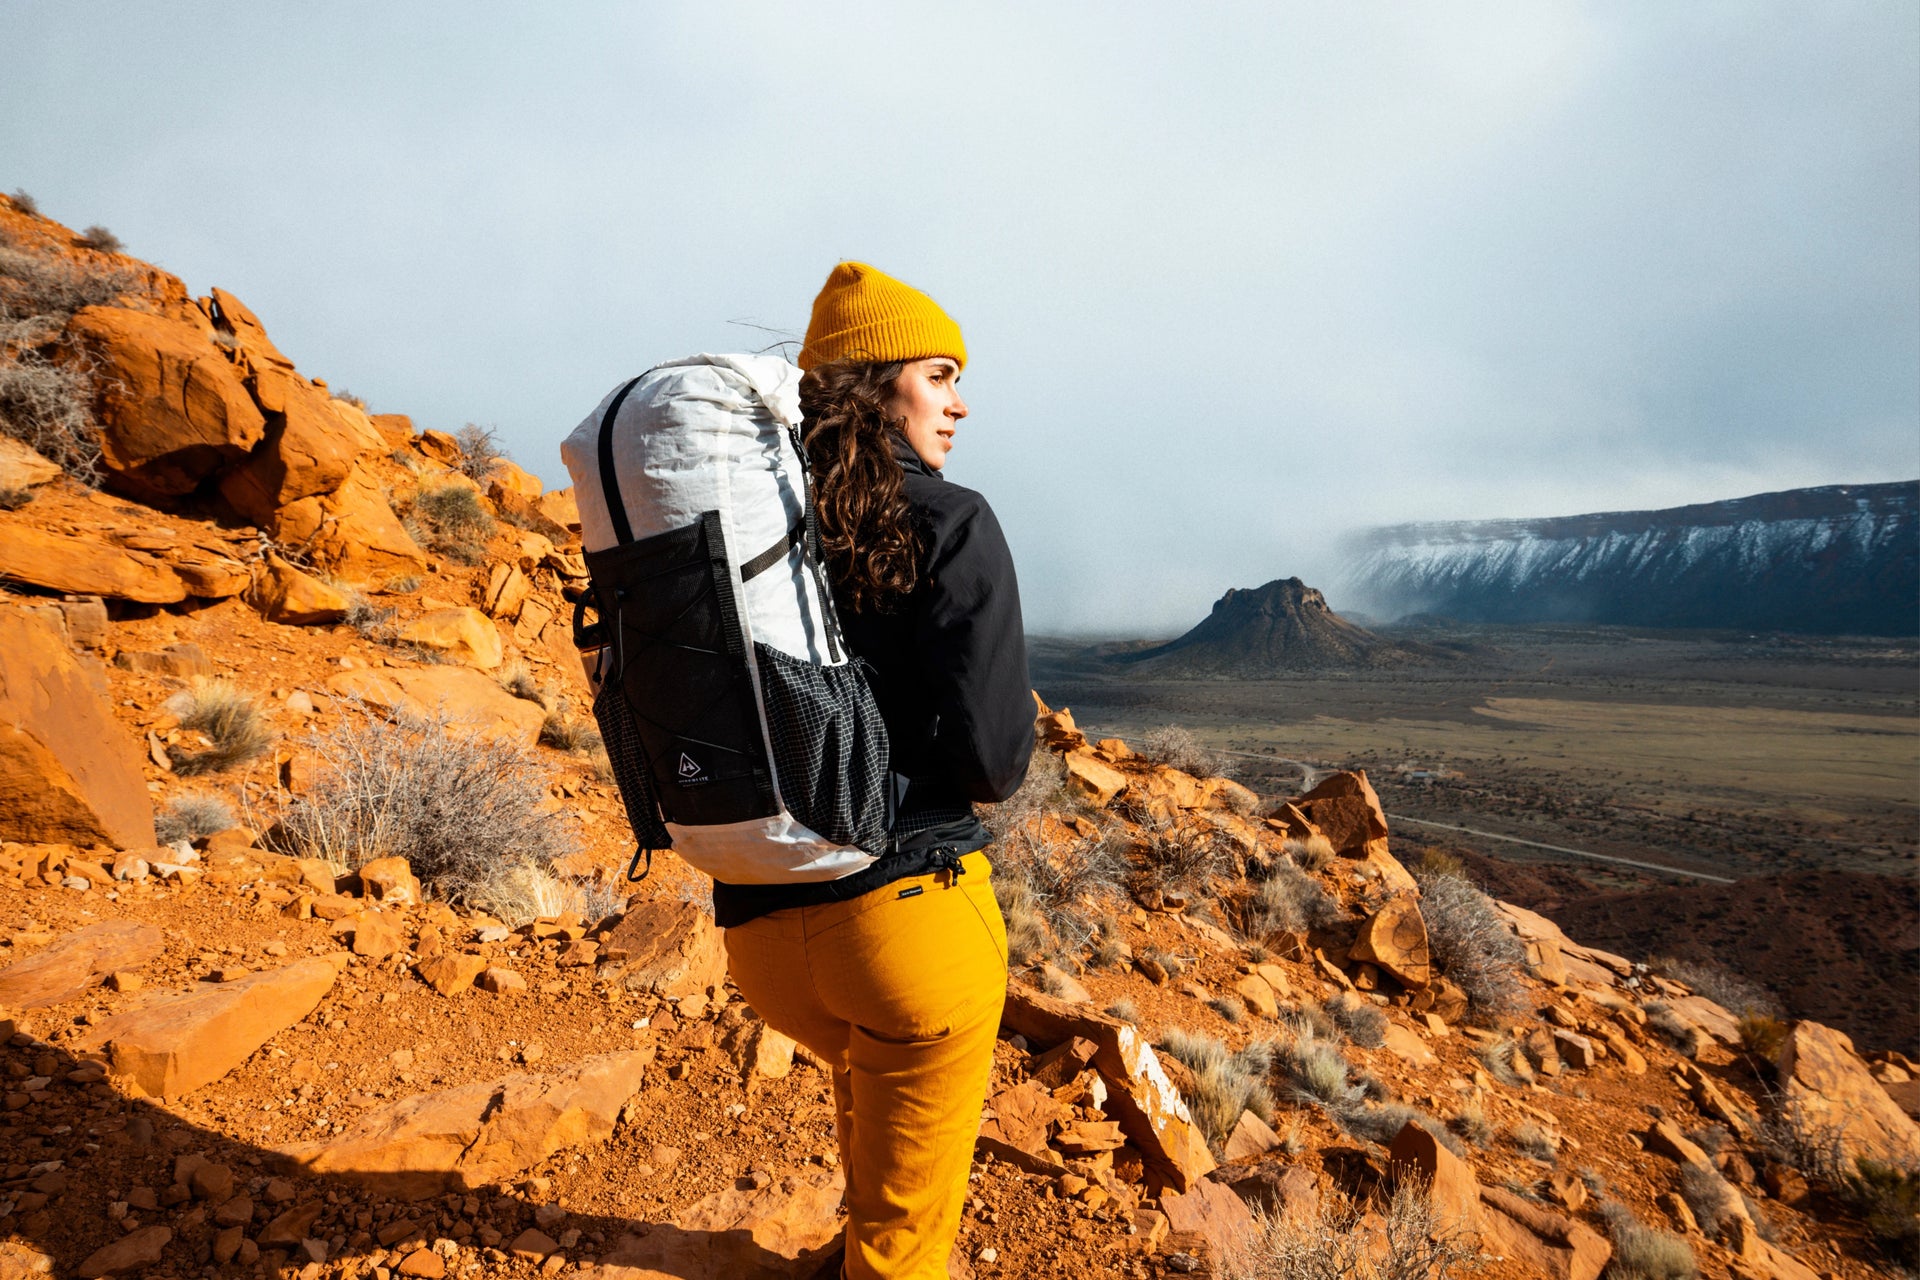 A woman with a backpack on a rocky trail.